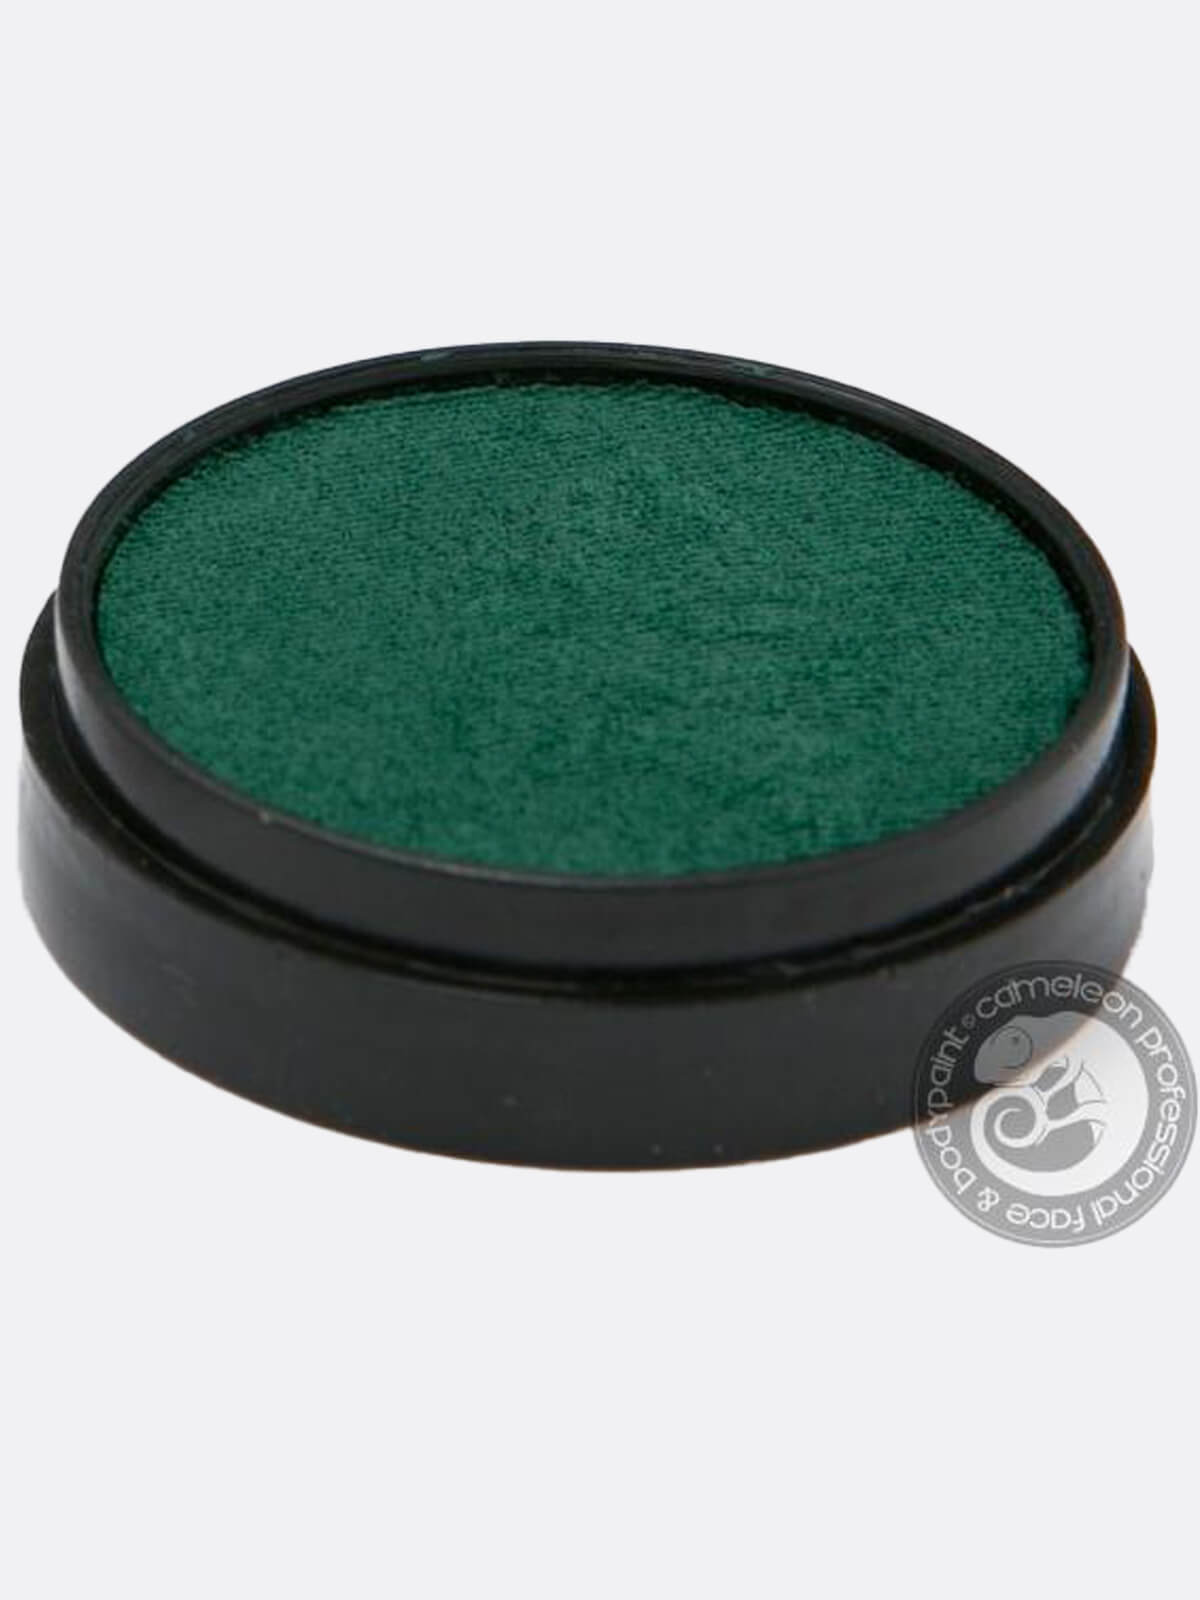 Clover Green Face Paint by Cameleon